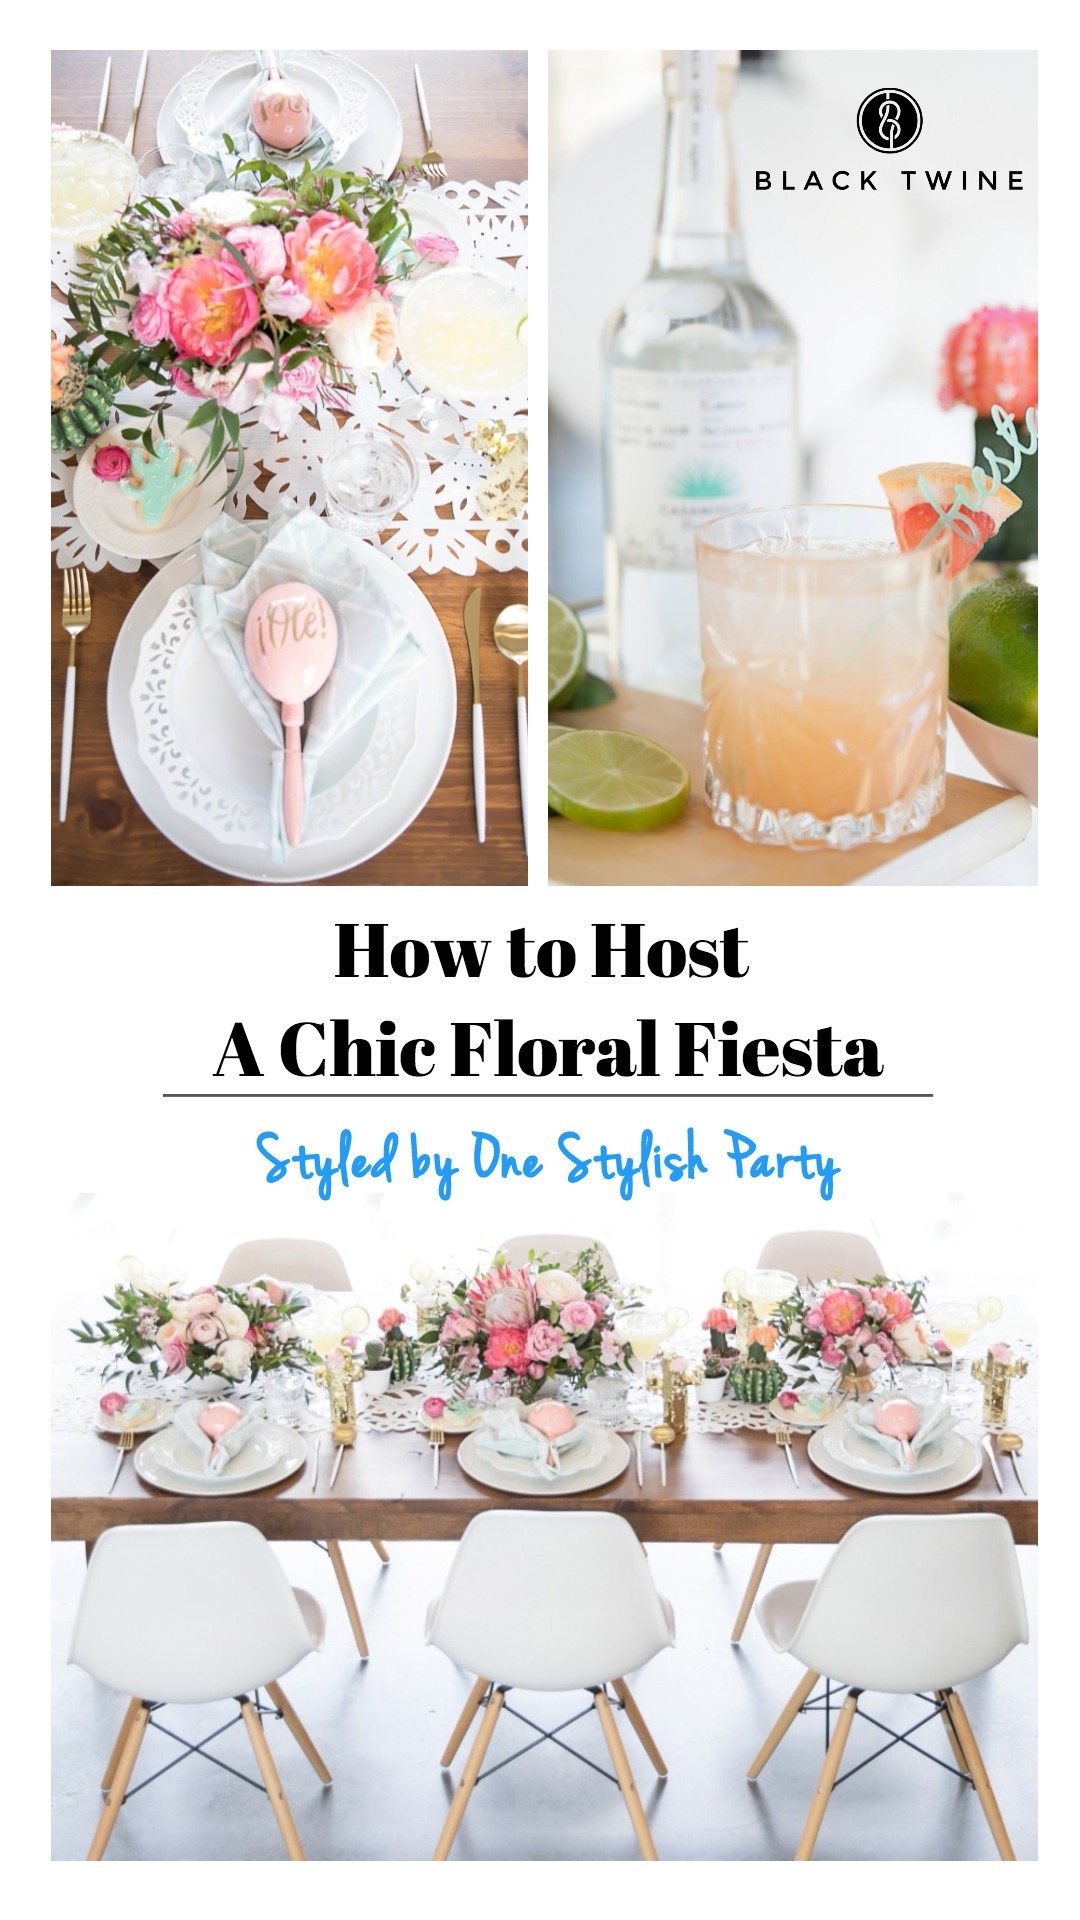 How to Host a Chic Floral Fiesta Cinco de Mayo party - Styled by One Stylish Party | Black Twine